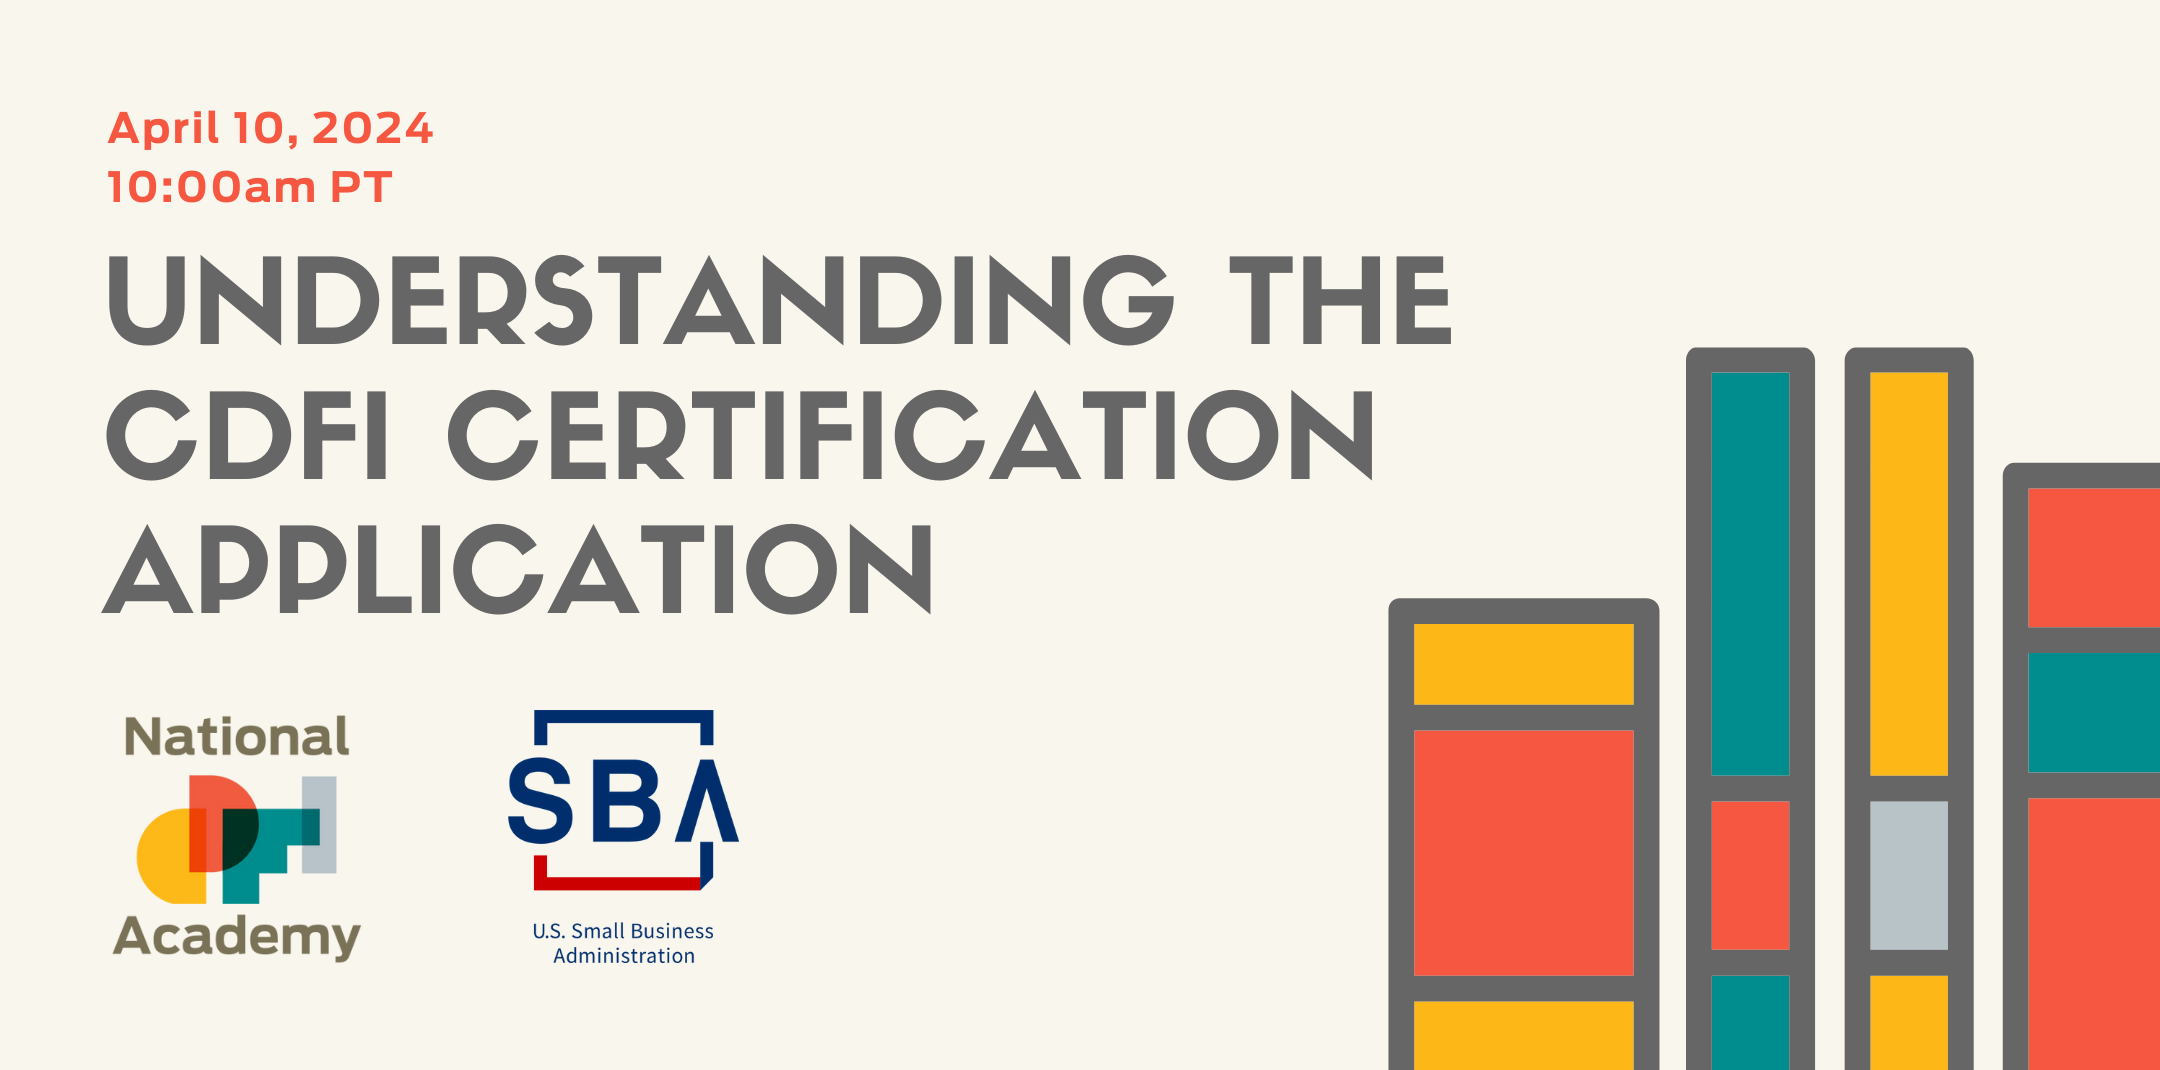 Understand the CDFI Certification Application